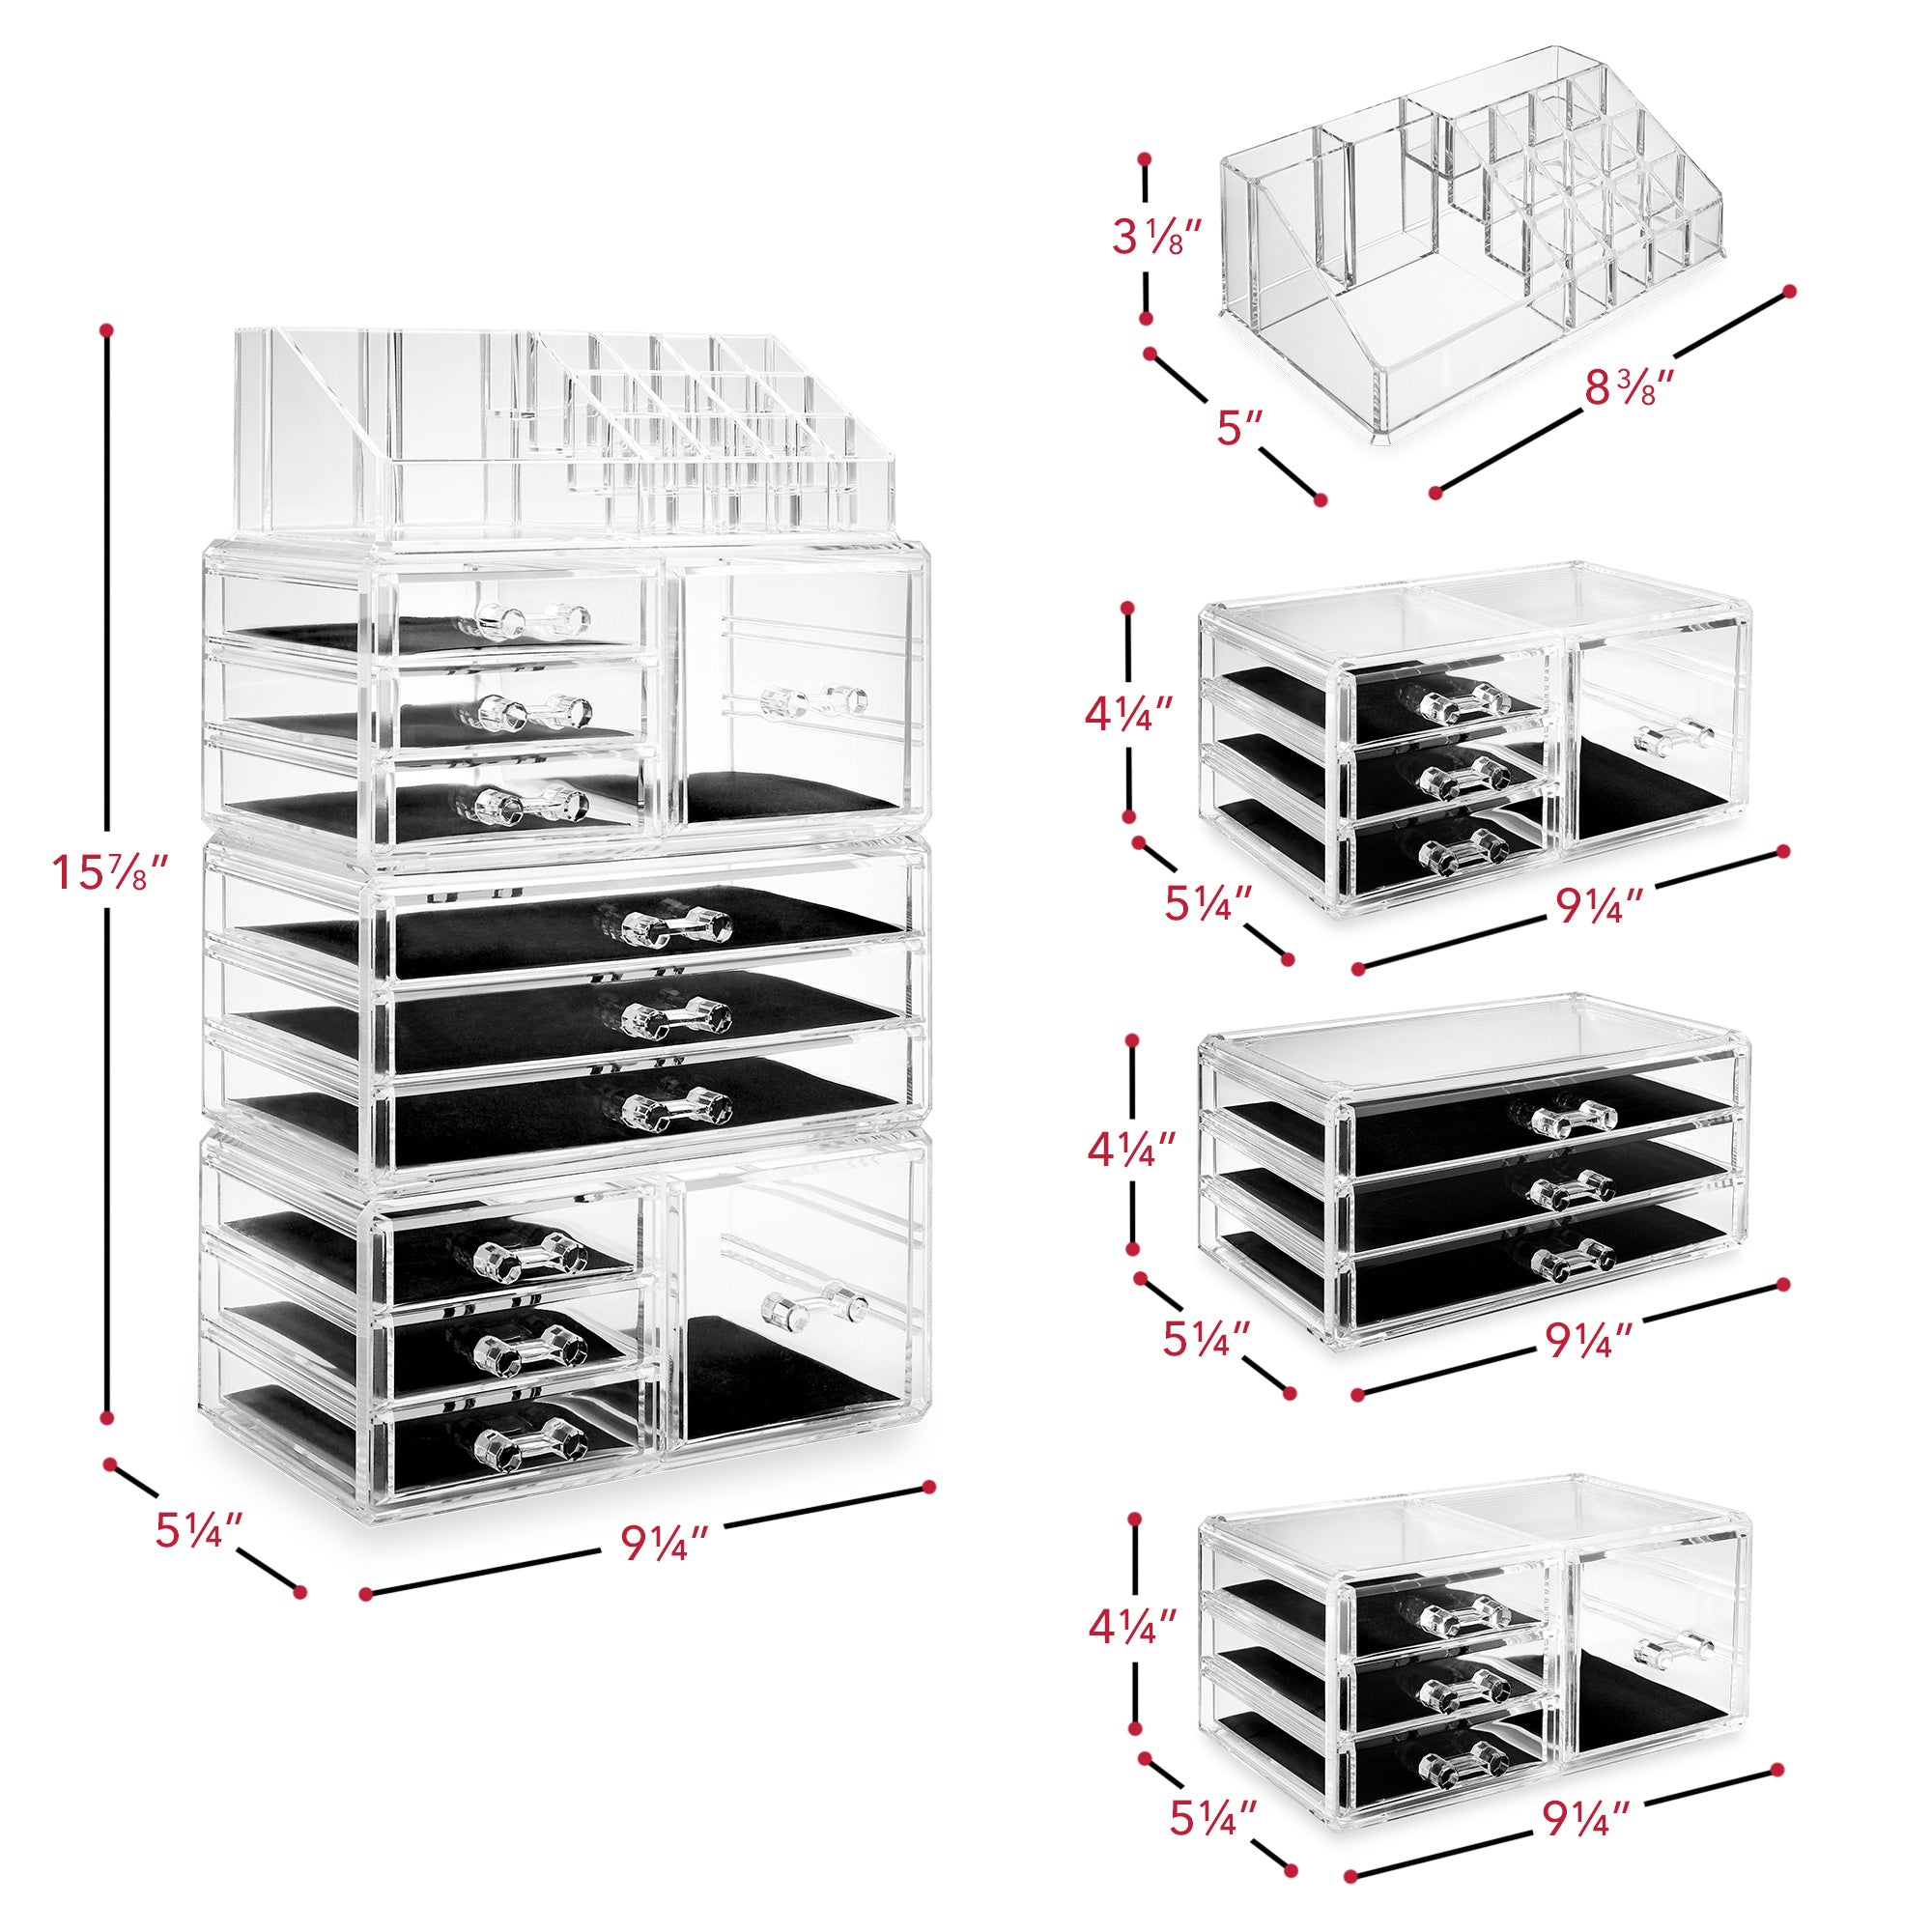 Casafield Acrylic Cosmetic Makeup Organizer & Jewelry Storage Display Case - 4 Large, 2 Small Drawer Set - Clear